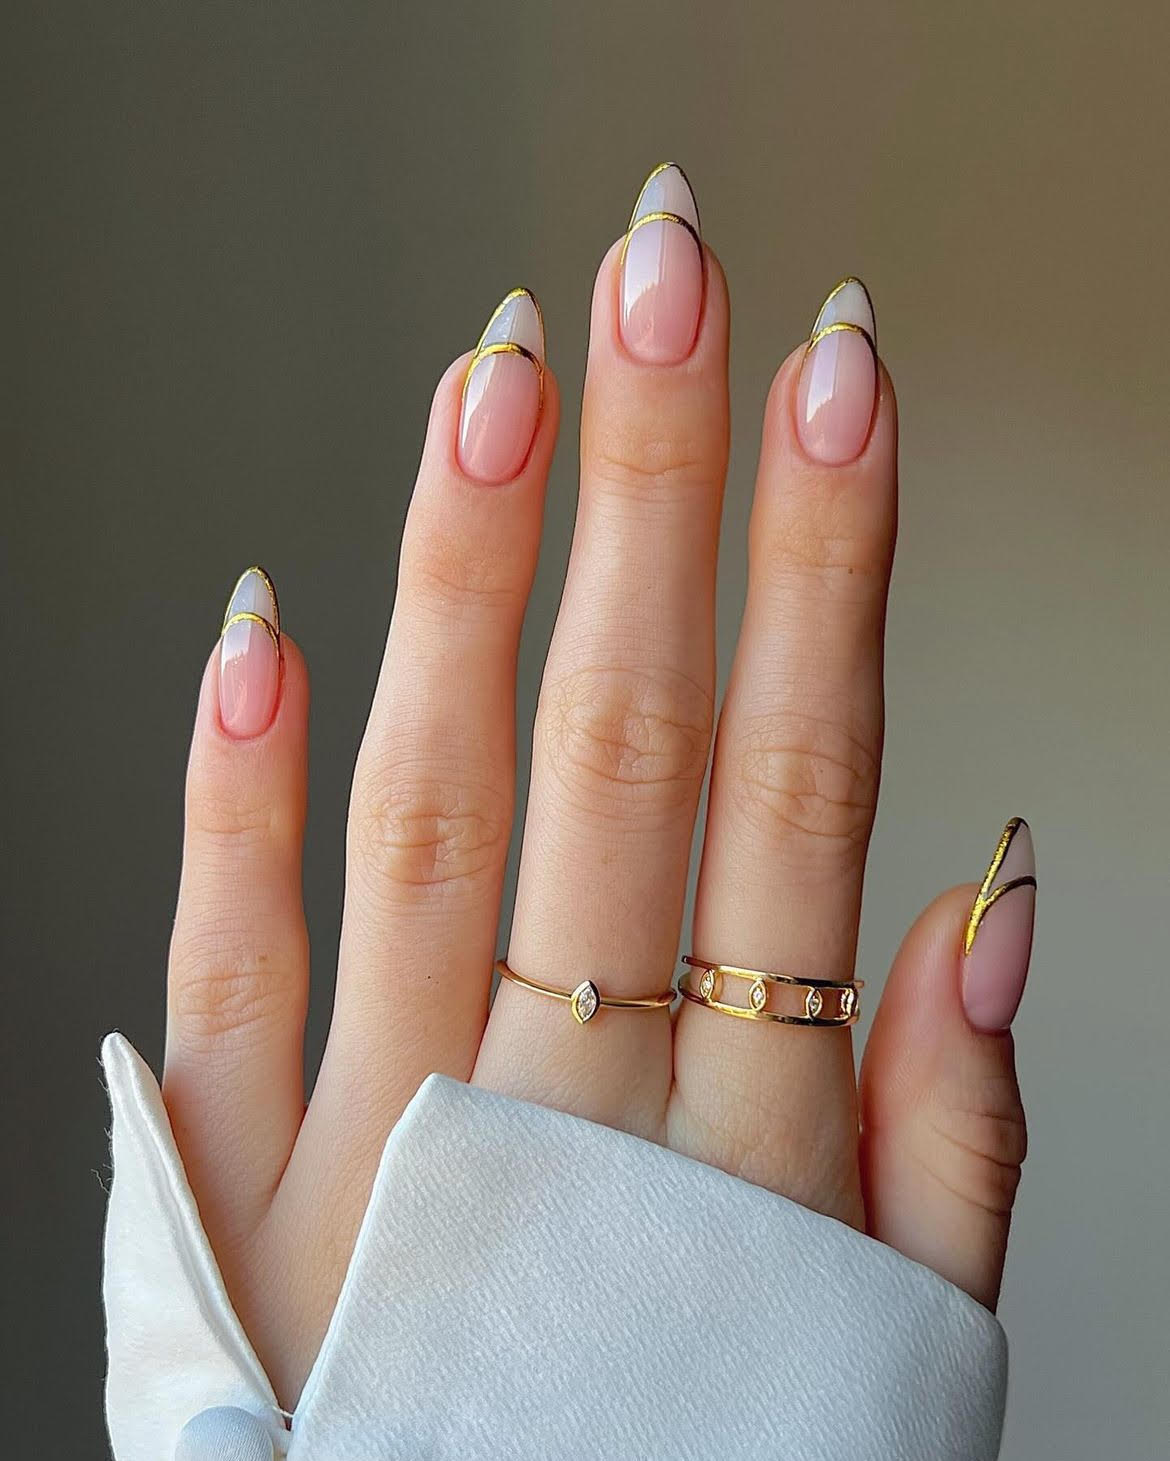 french tip